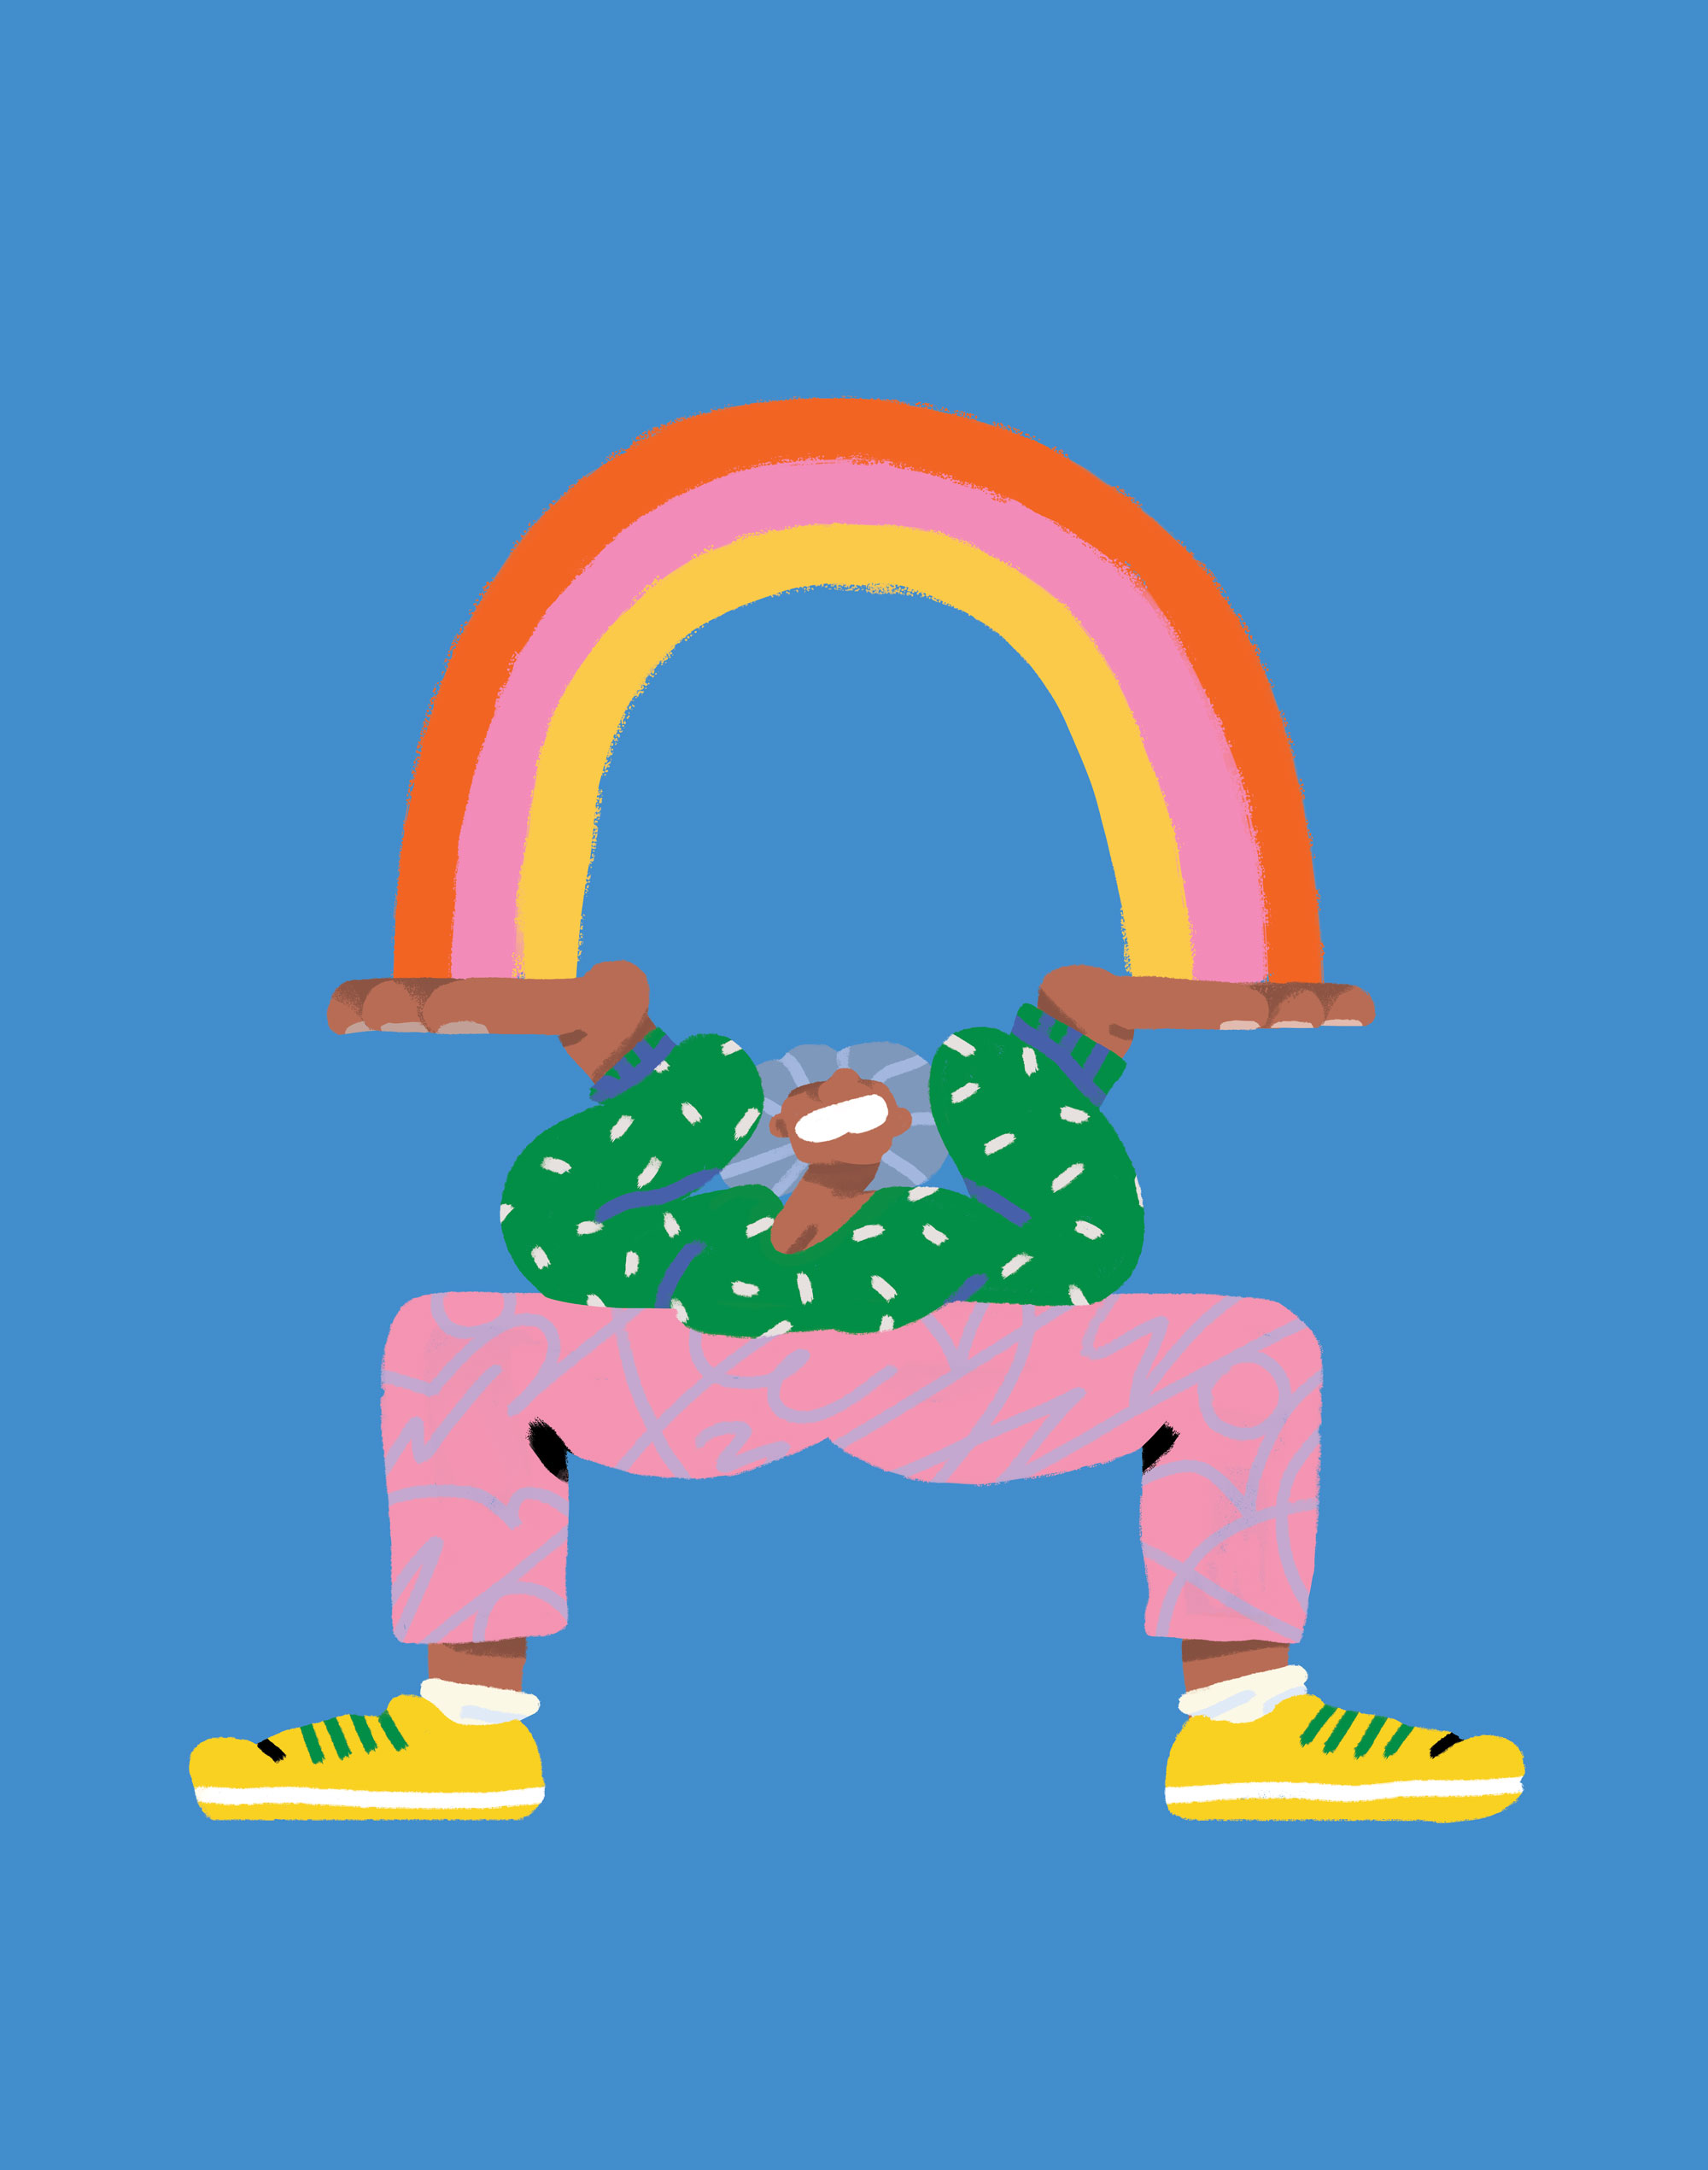 Illustration of person holding a rainbow between their palms